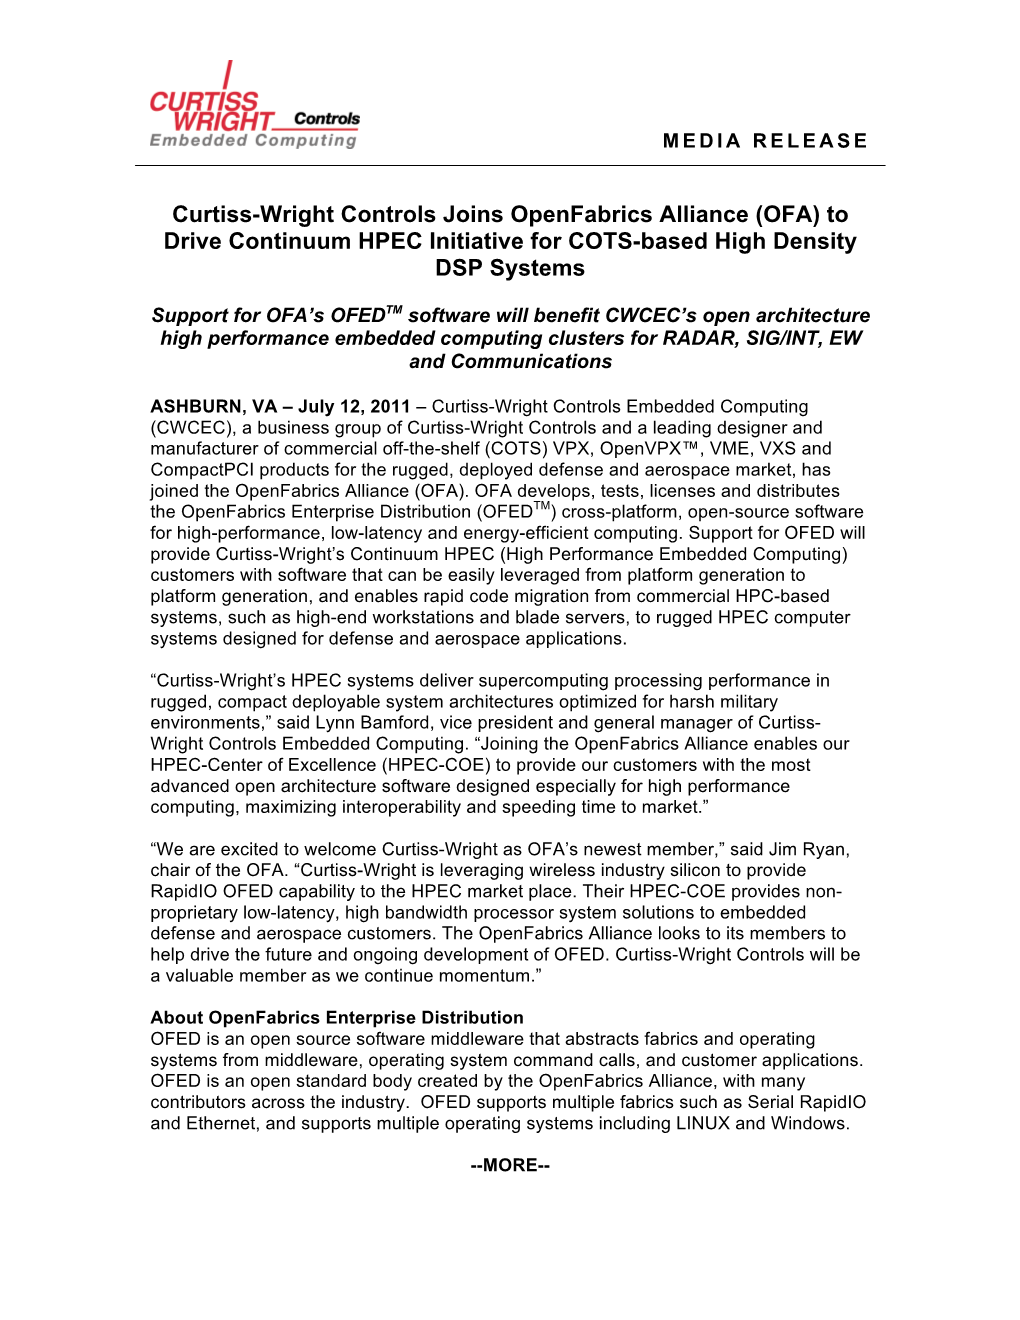 Curtiss-Wright Controls Joins Openfabrics Alliance (OFA) to Drive Continuum HPEC Initiative for COTS-Based High Density DSP Systems